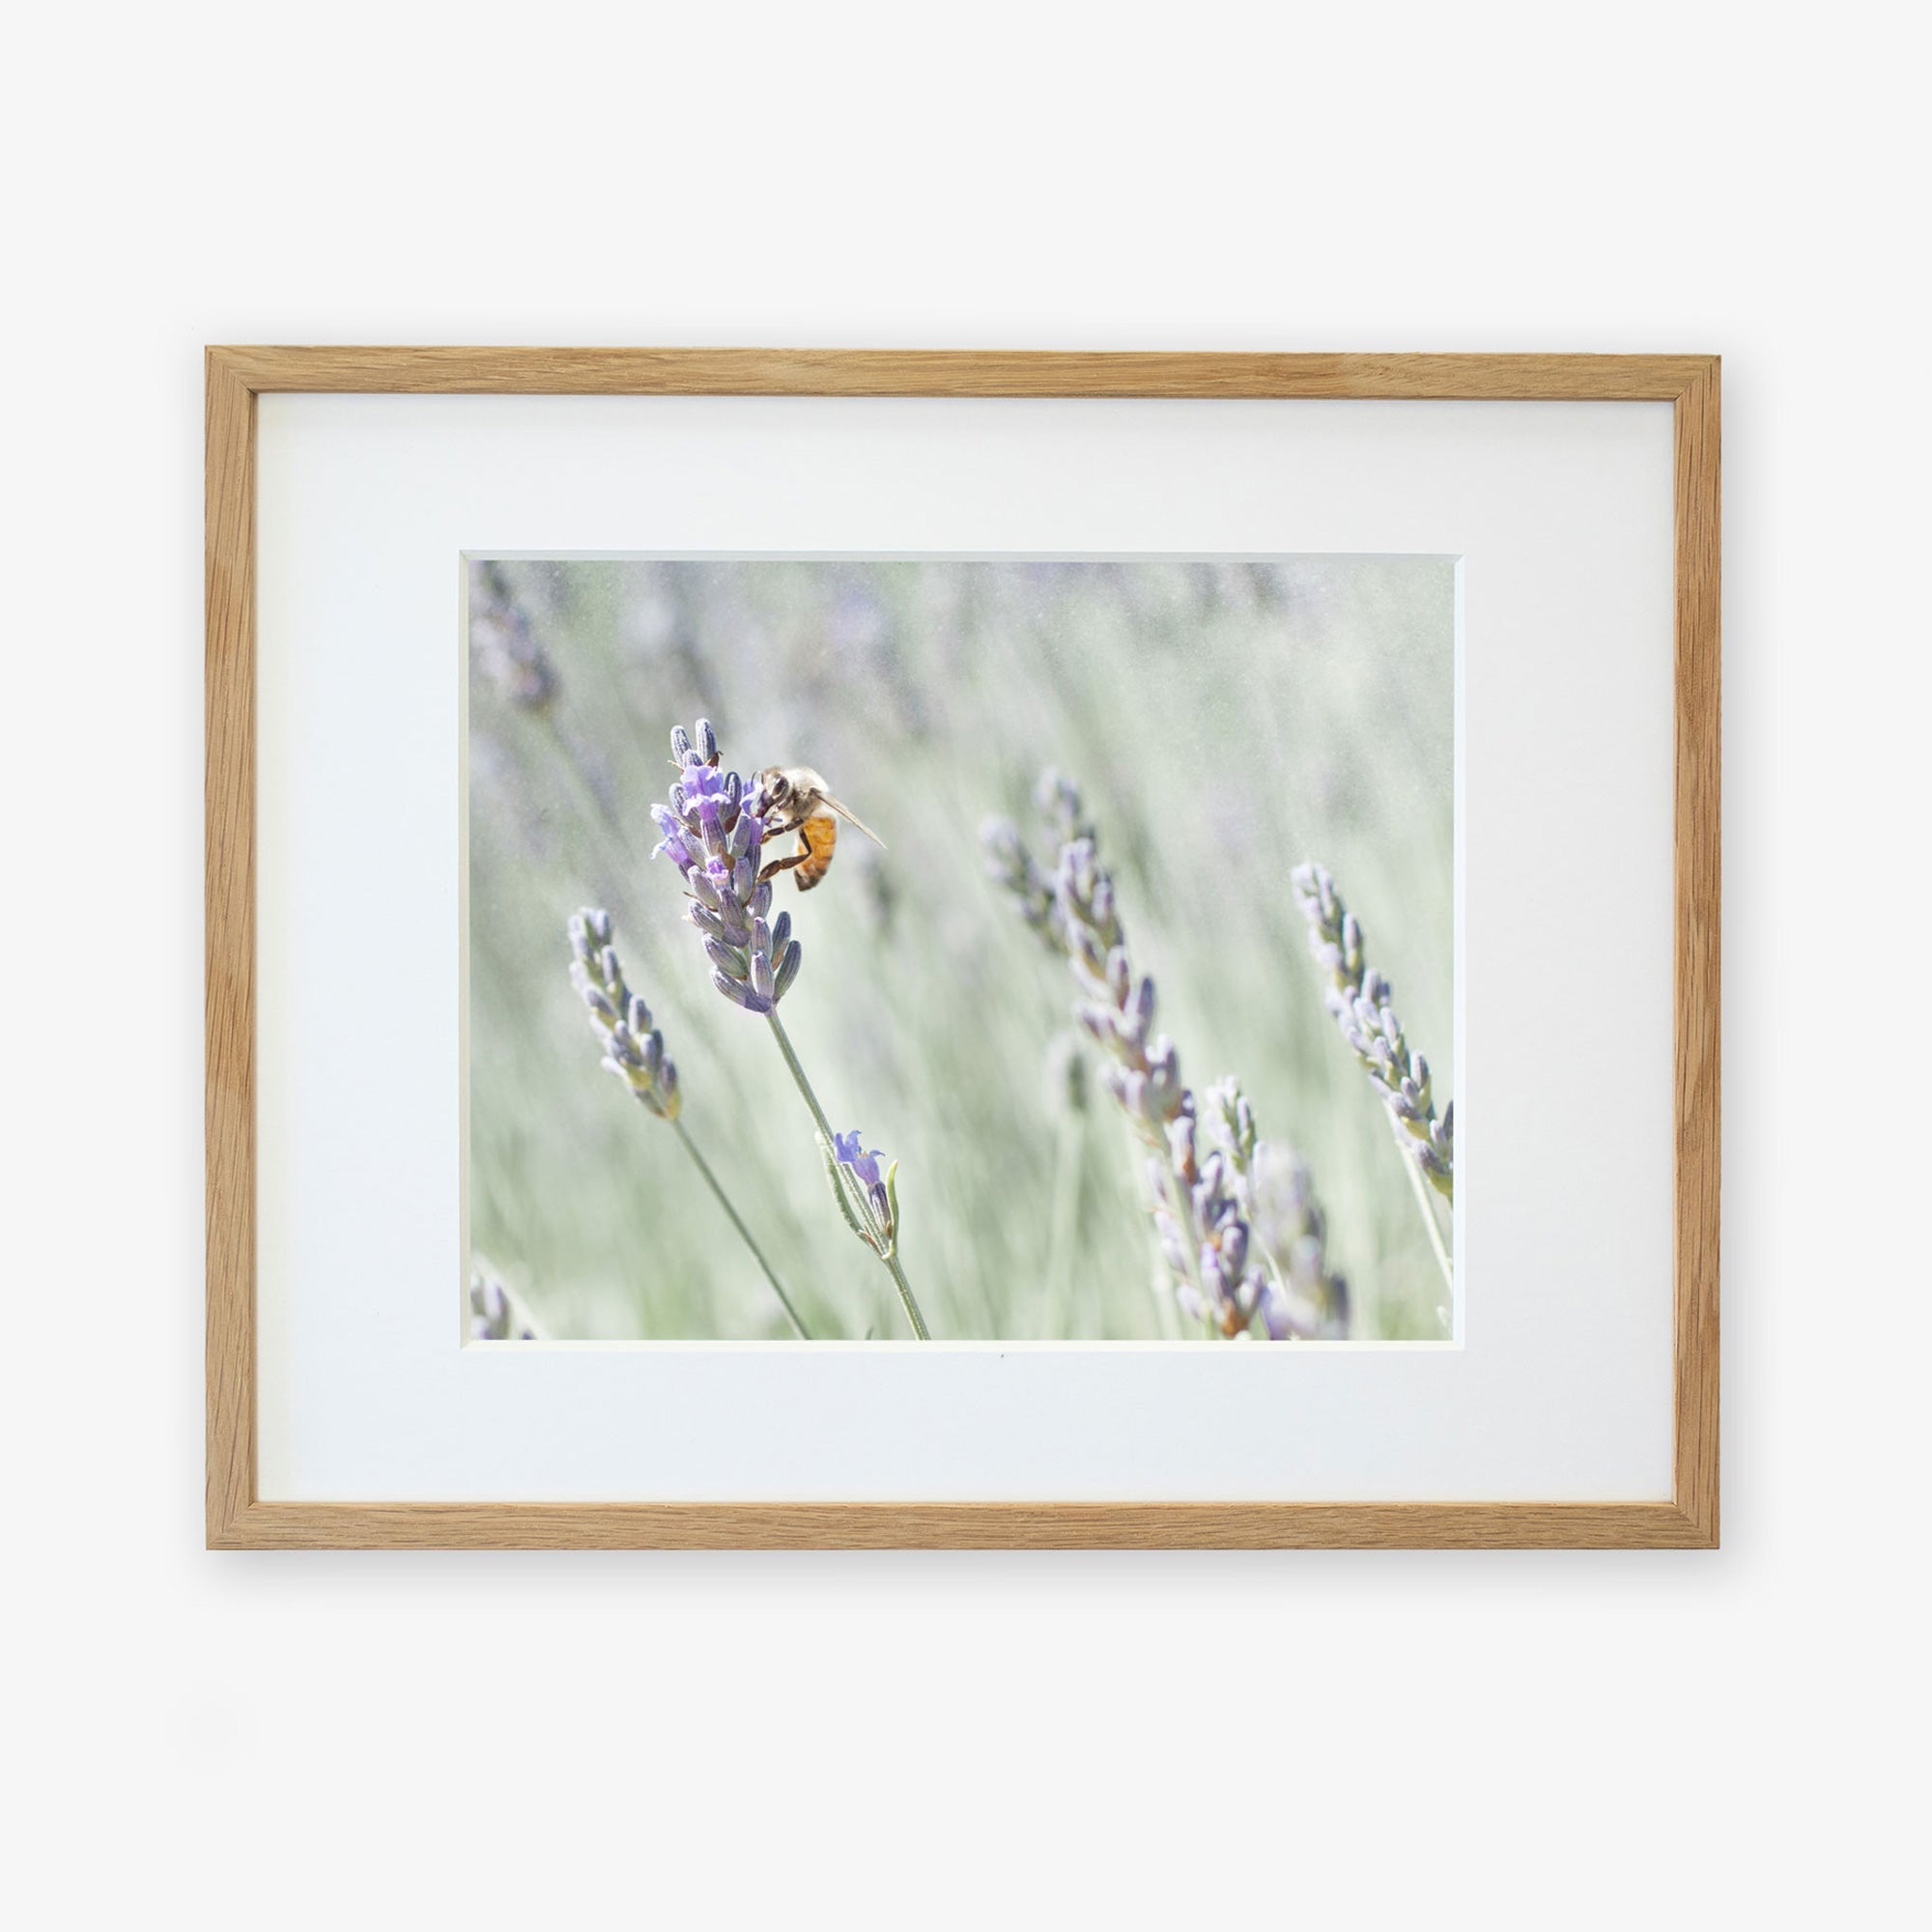 A framed photograph of a Rustic Floral Print, &#39;Lavender for Bees&#39; by Offley Green, emphasizing the bee&#39;s detailed texture and the soft purple hues of the lavender, printed on archival photographic paper and mounted as wall art.